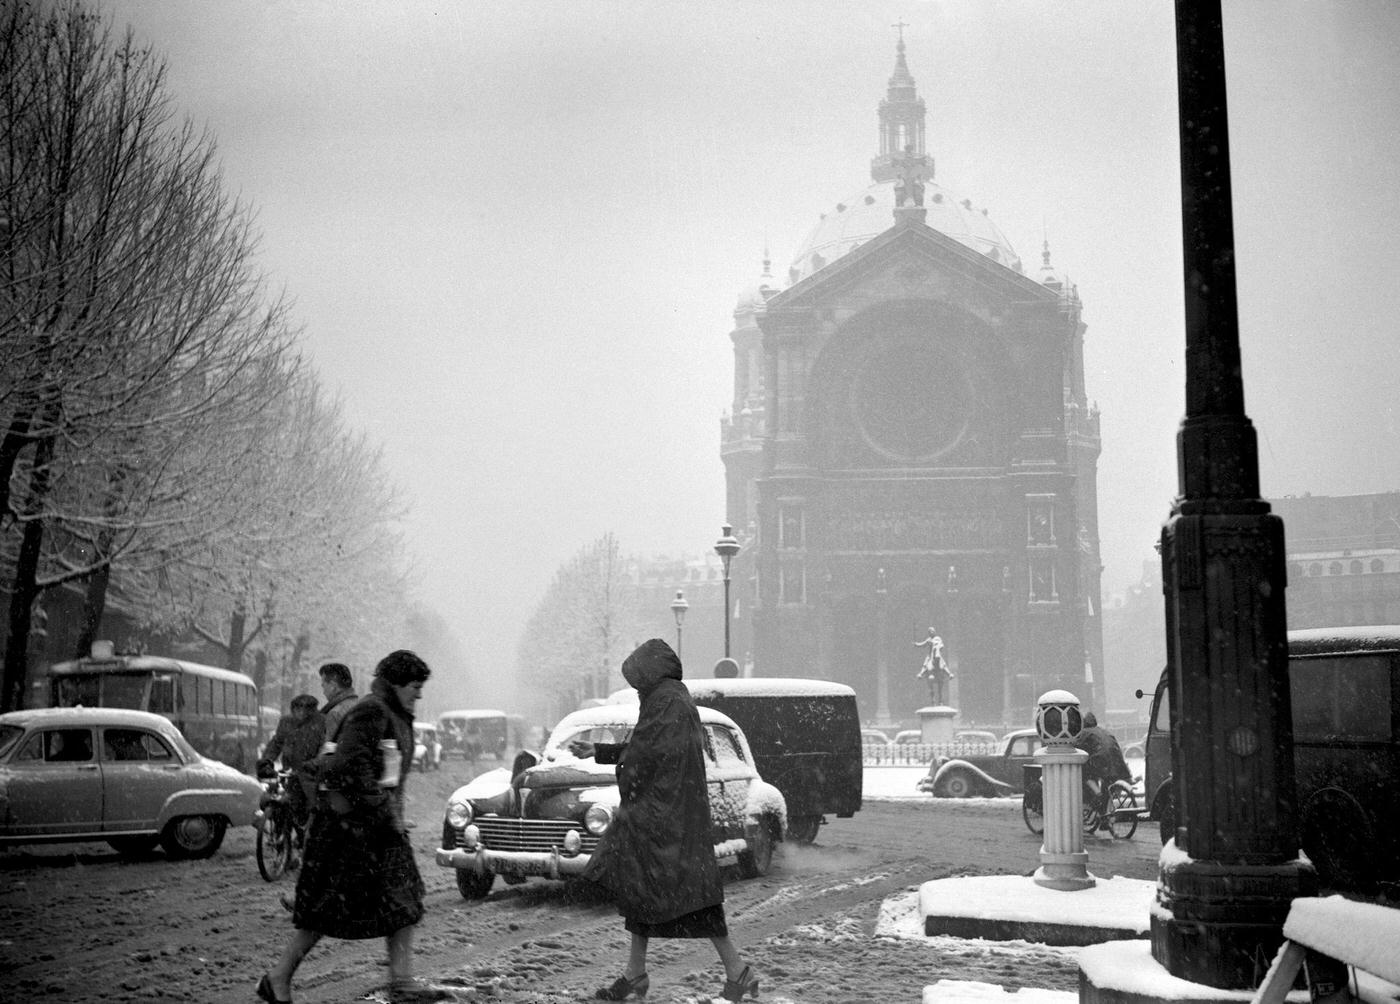 People Walking In The Muddy Snow In Paris During The 1952 Winter.